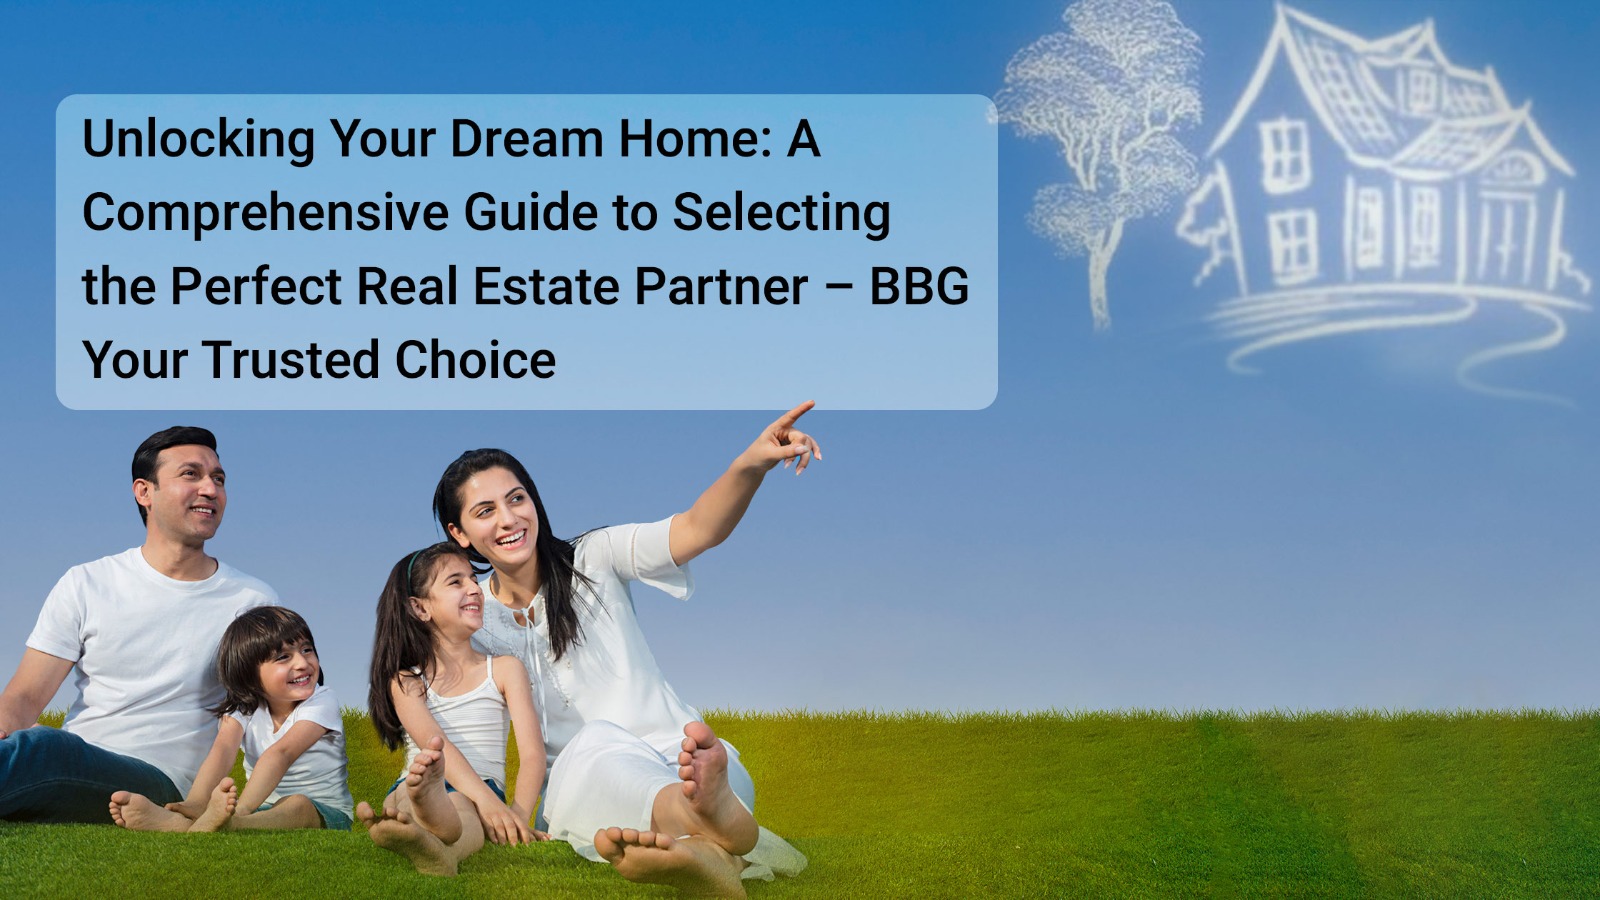 Unlocking Your Dream Home: A Comprehensive Guide to Selecting the Perfect Real Estate Partner – BBG, Your Trusted Choice